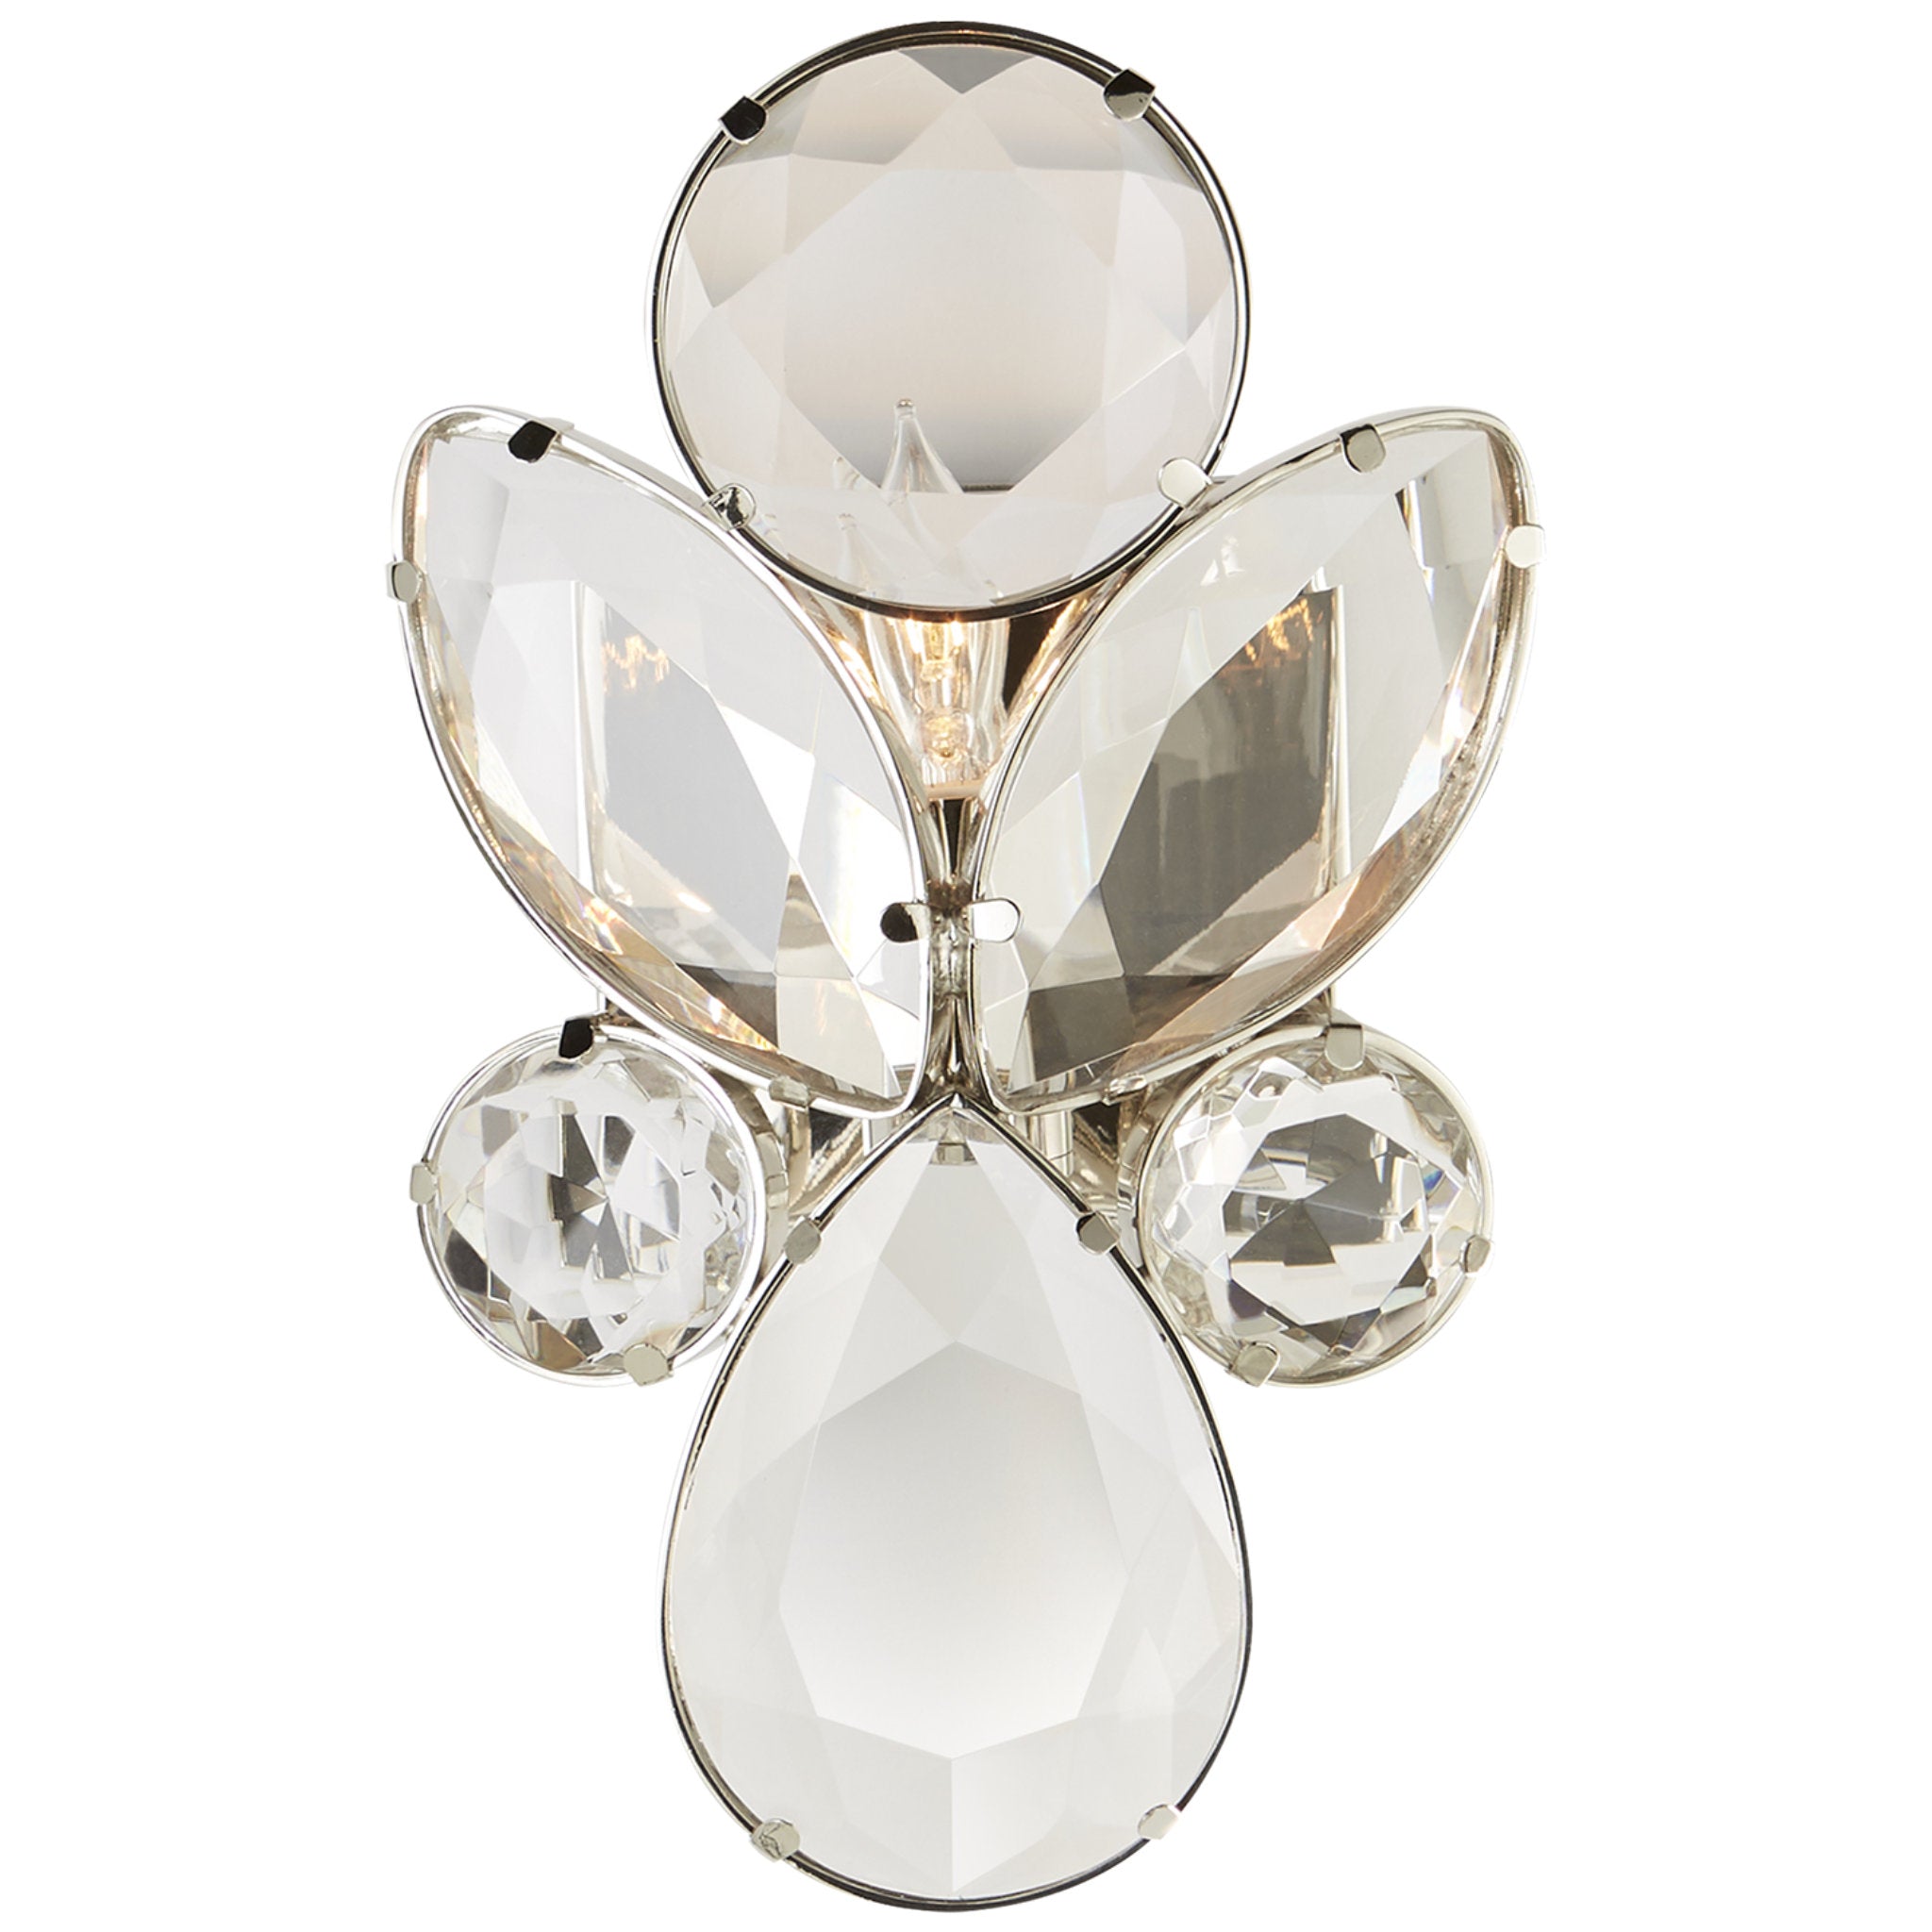 kate spade new york Lloyd Small Jeweled Sconce in Nickel with Clear Crystal